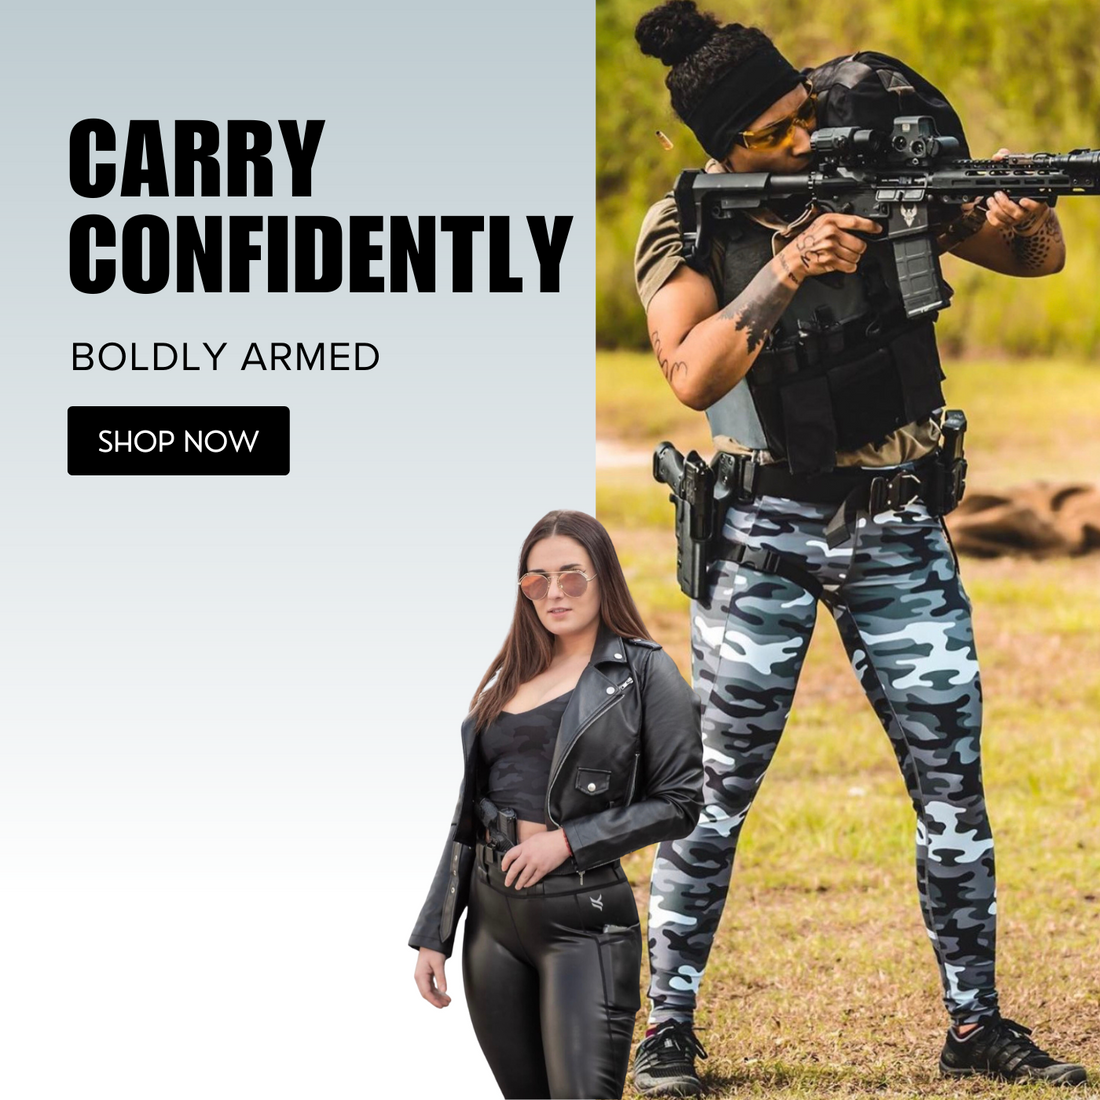 Behind the Counter with KYGUNCO & Lady's CCW Apparel